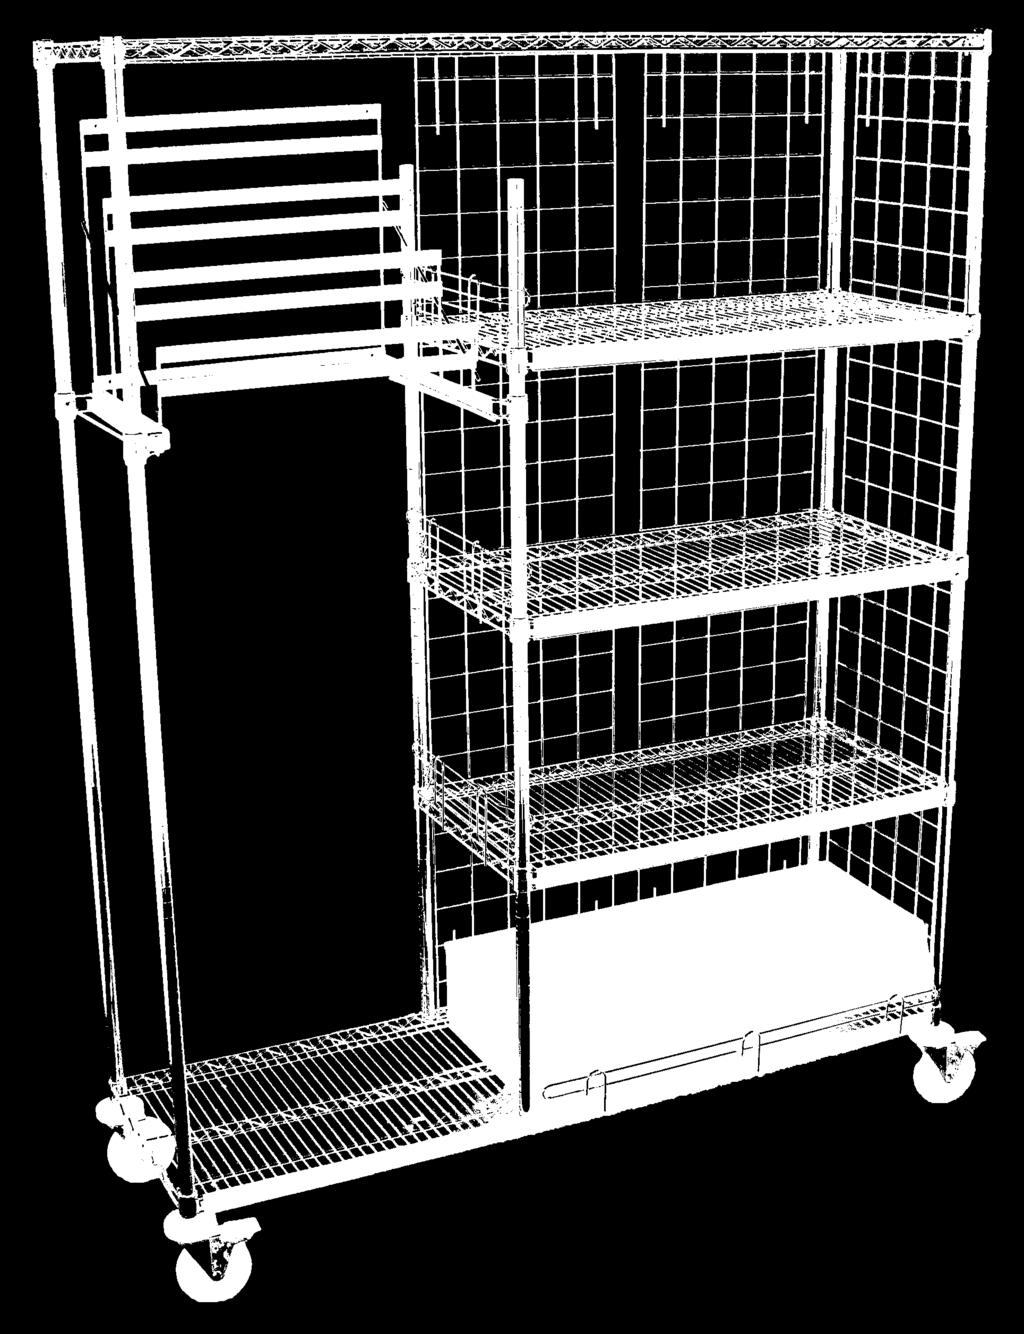 Carts are shipped partially assembled. SP-24-60 Catheter Rack complete with 24 hooks ad label holders. CARTS SP-24-48.